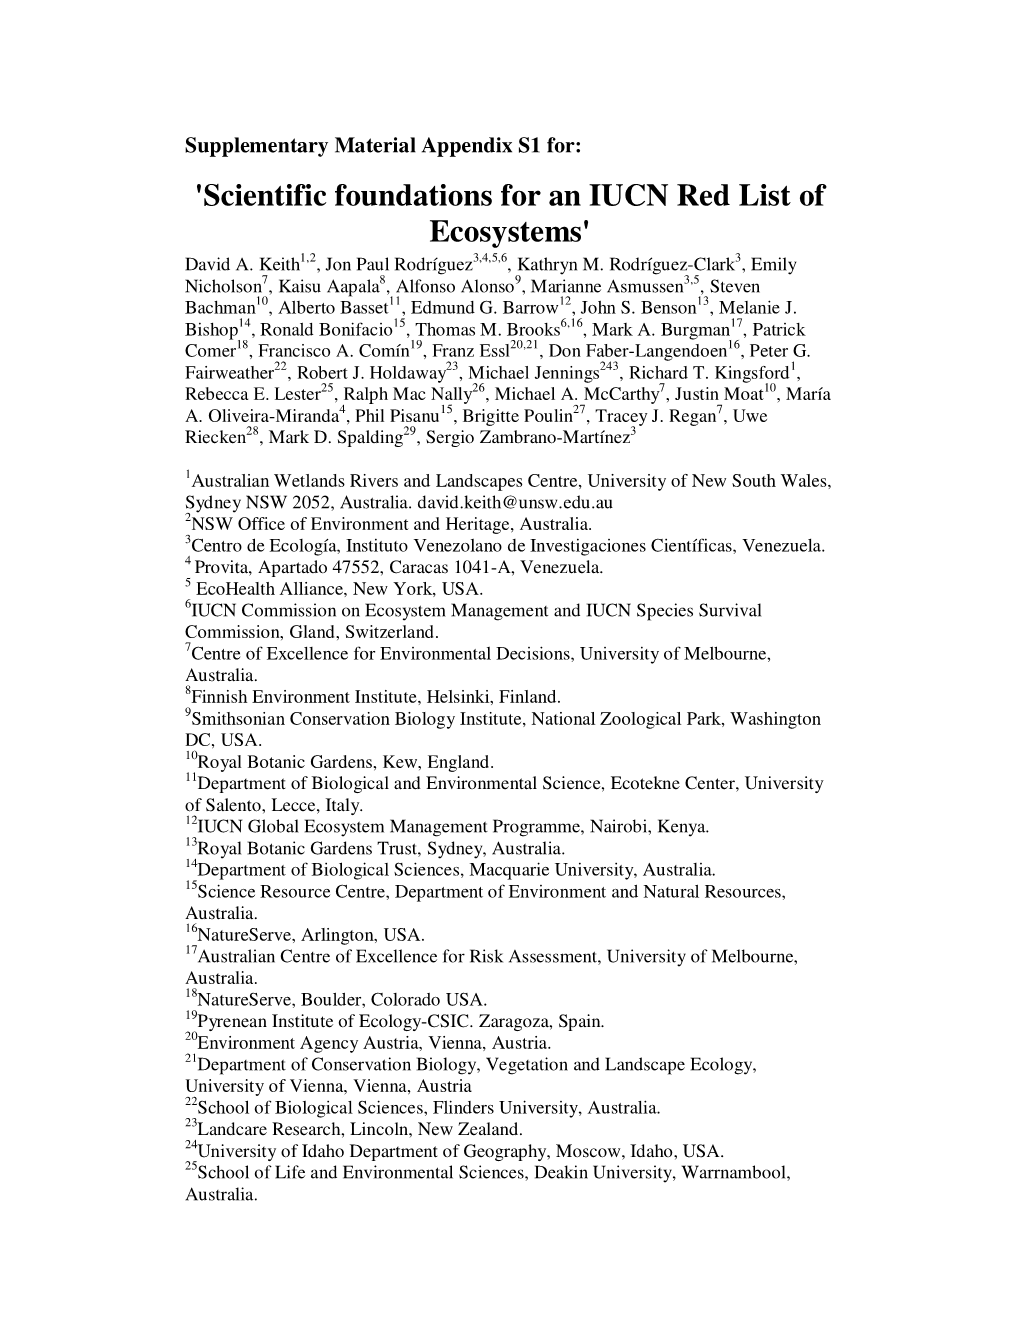 Appendix S1 For: 'Scientific Foundations for an IUCN Red List of Ecosystems' David A